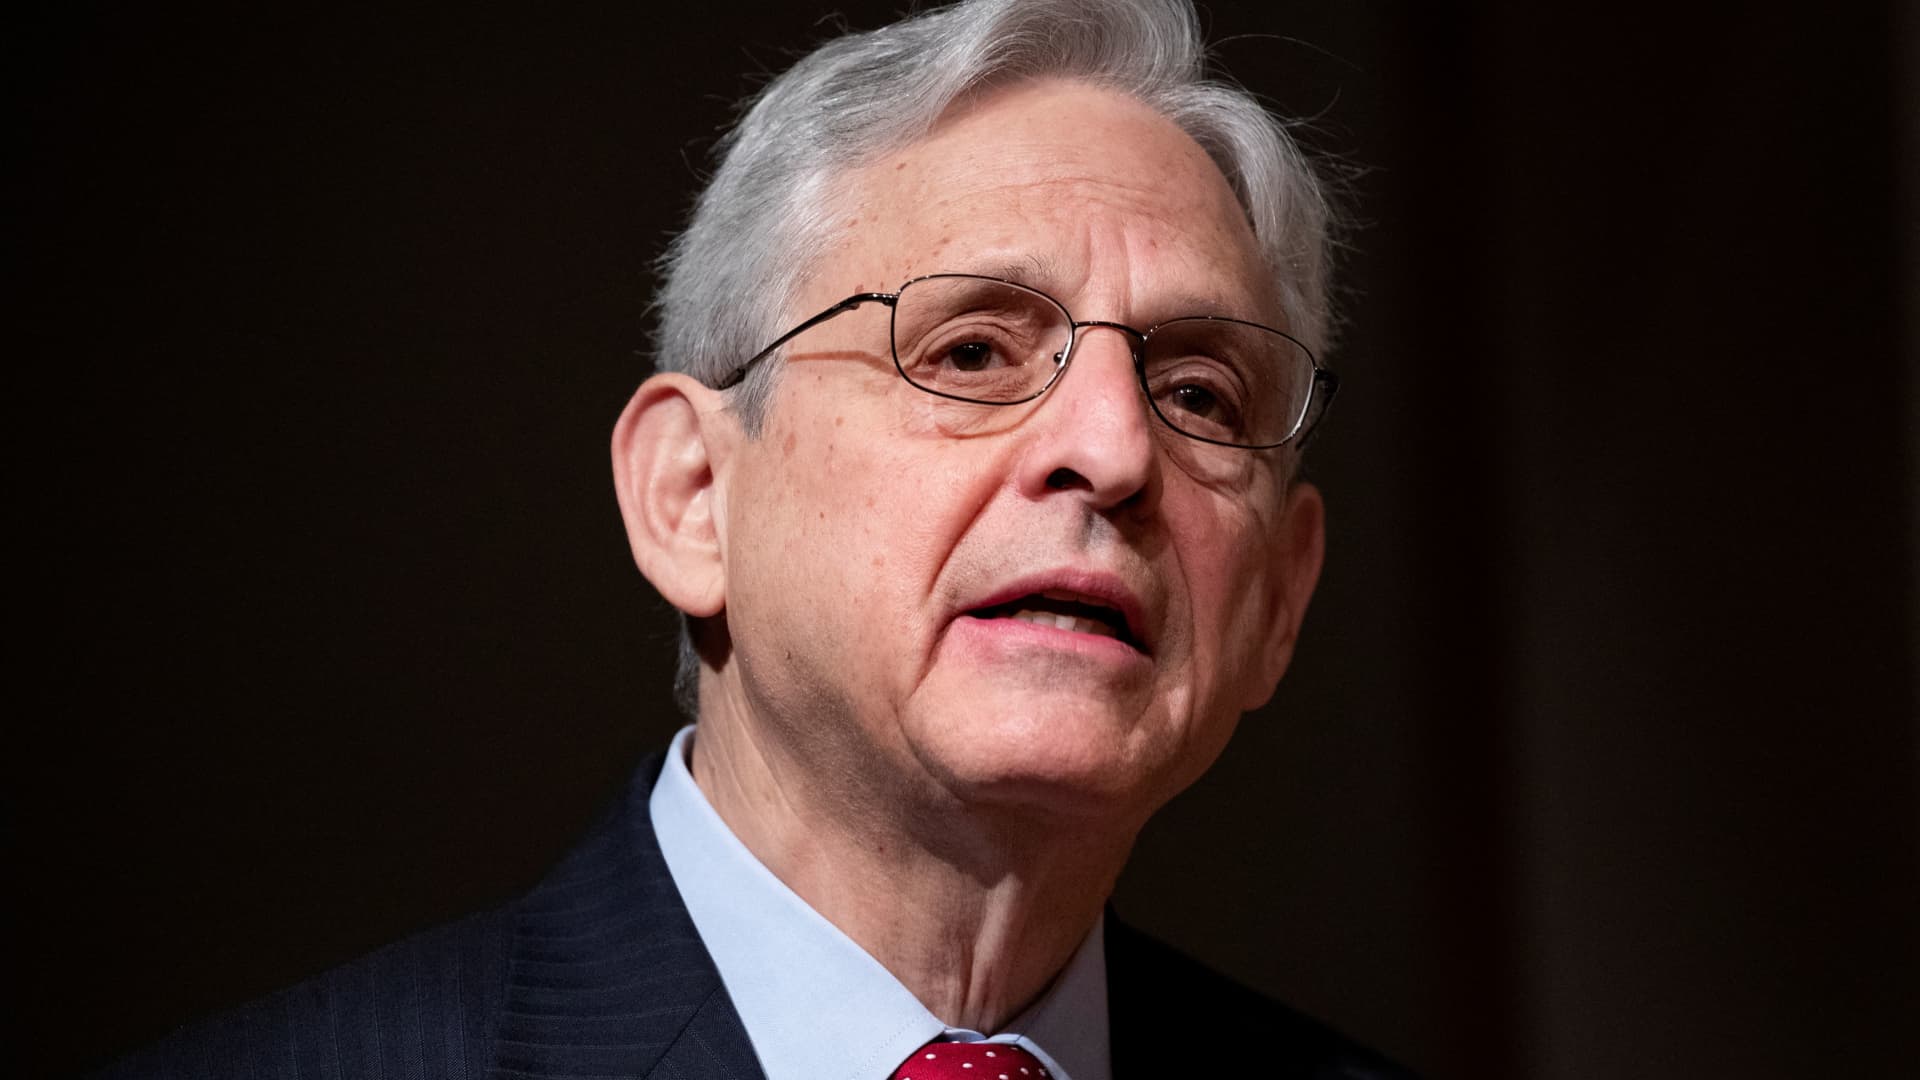 United States Attorney General Merrick Garland delivers opening remarks on crime gun intelligence during the Police Executive Forum, at the United States Bureau of Alcohol, Tobacco, Firearms and Explosives (ATF) headquarters in Washington, DC, U.S., May 5, 2022.